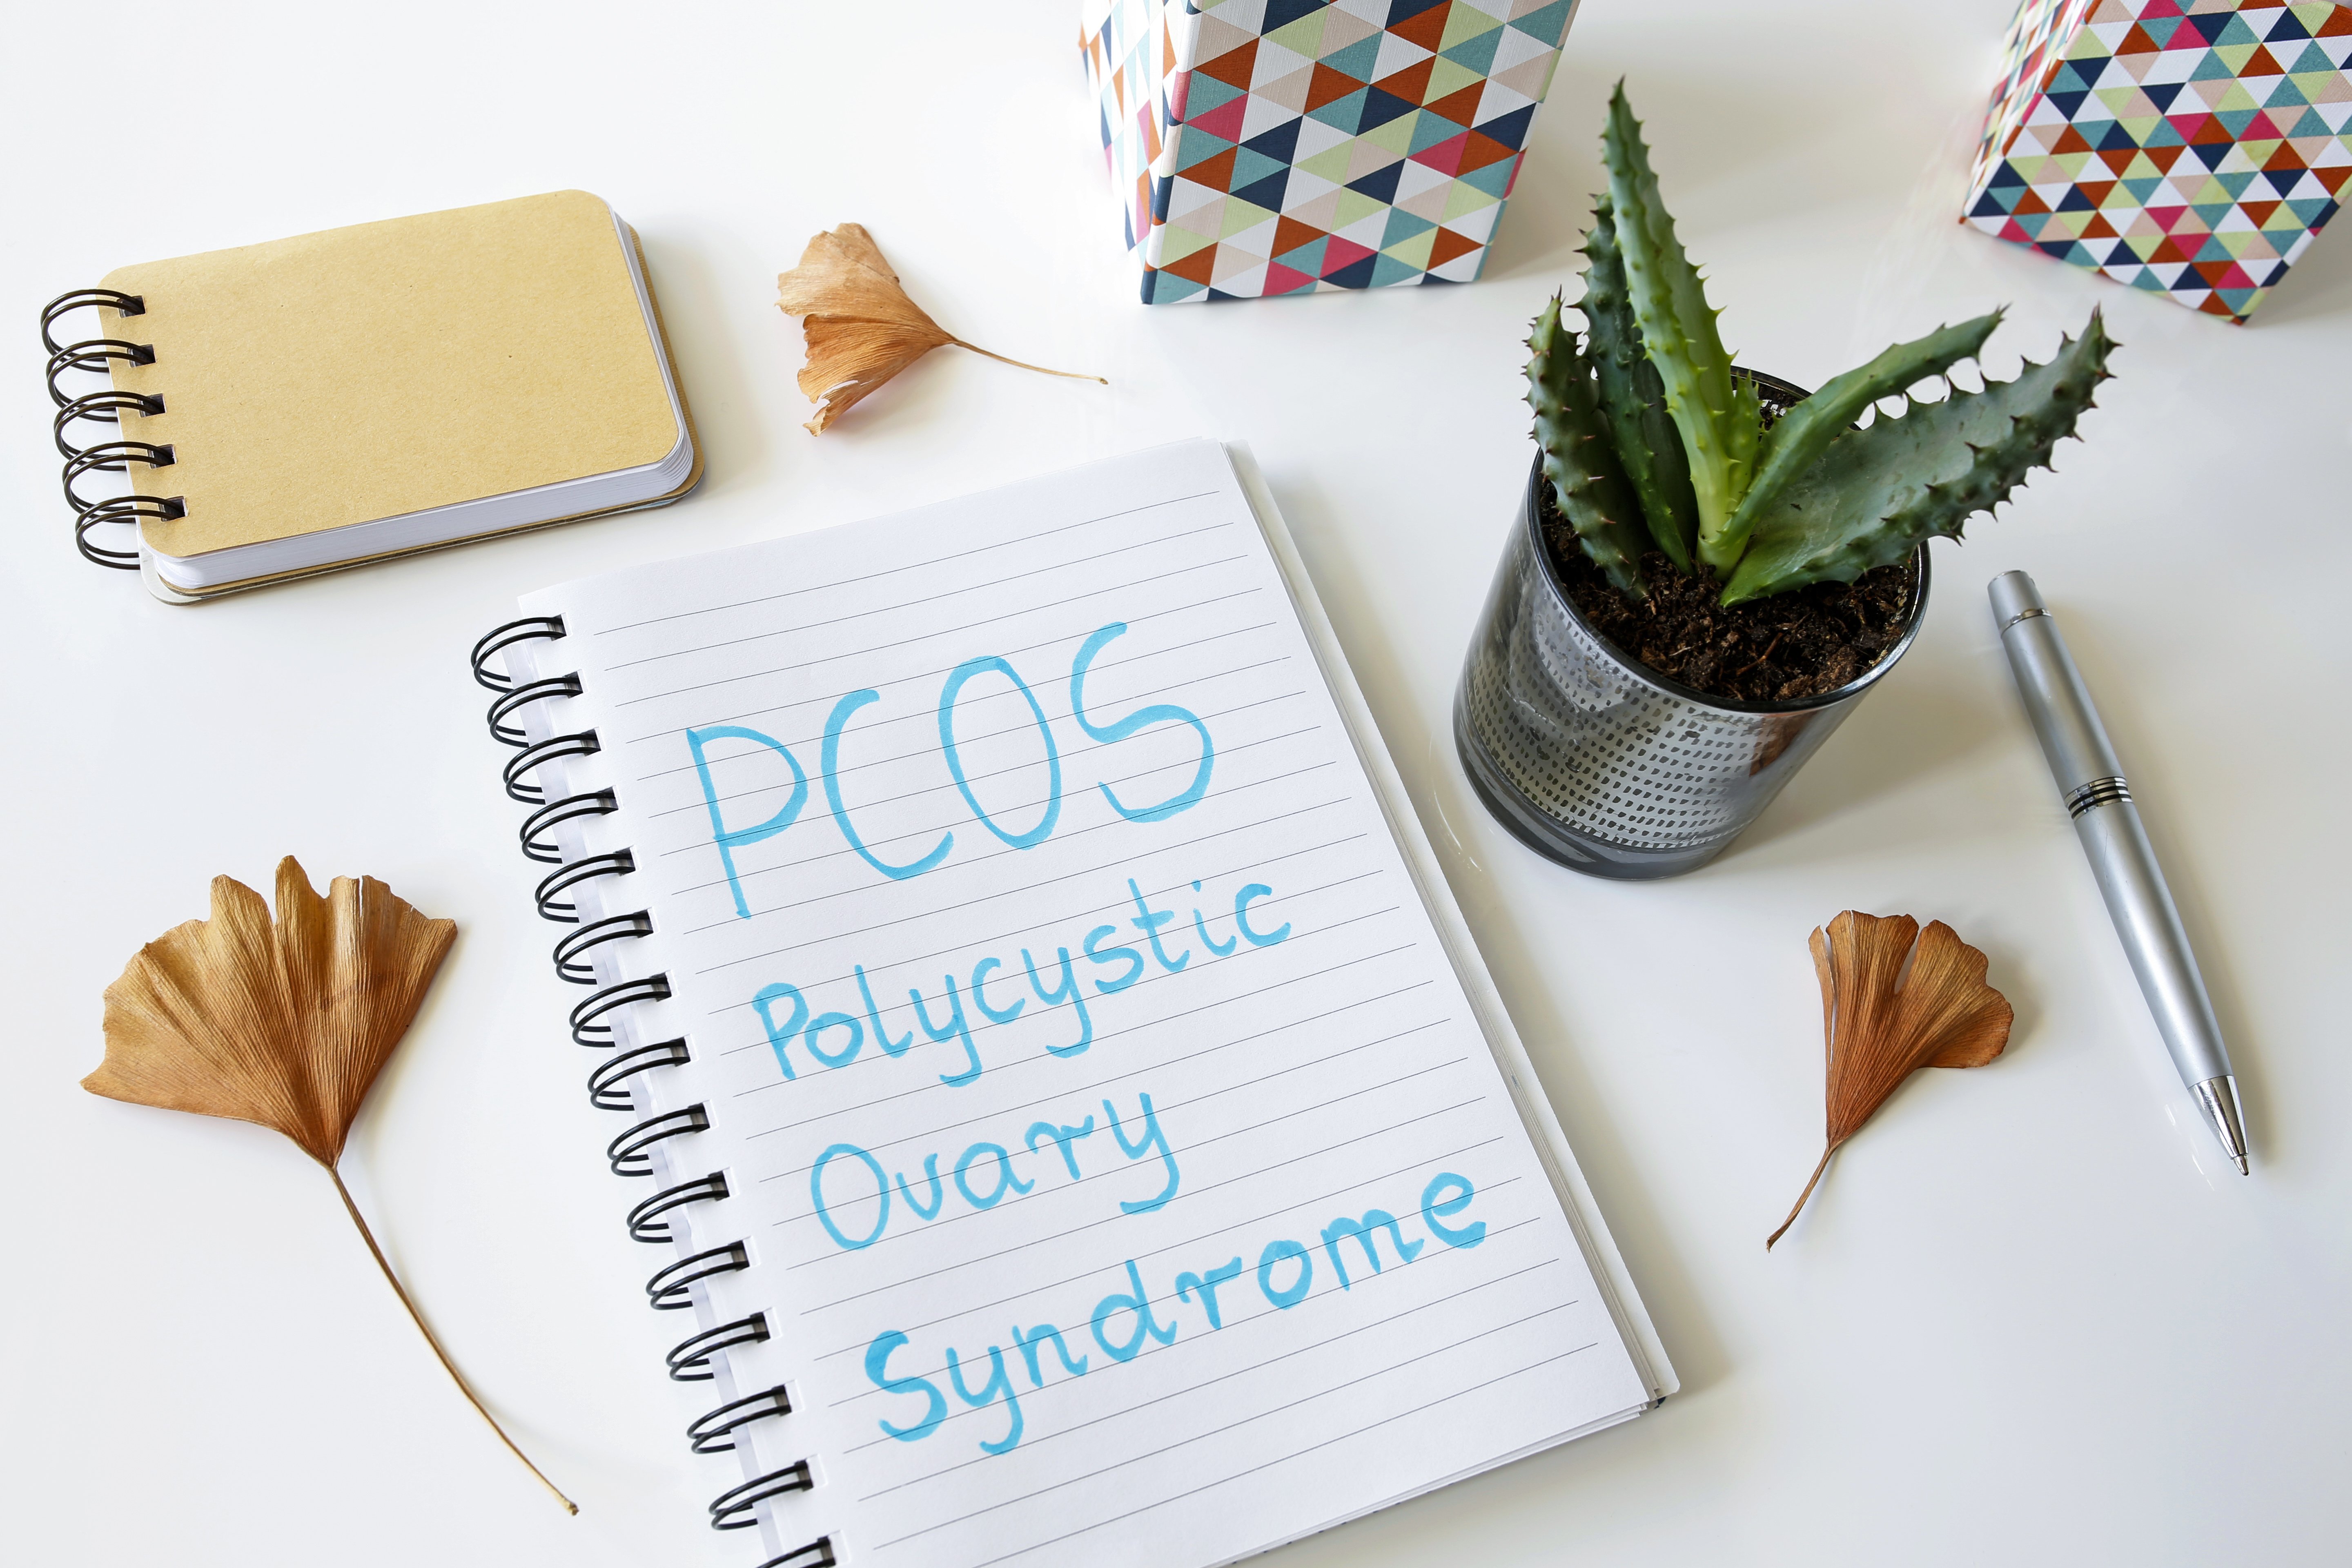 PCOS: What it is and How it can Impact Reproductive Health